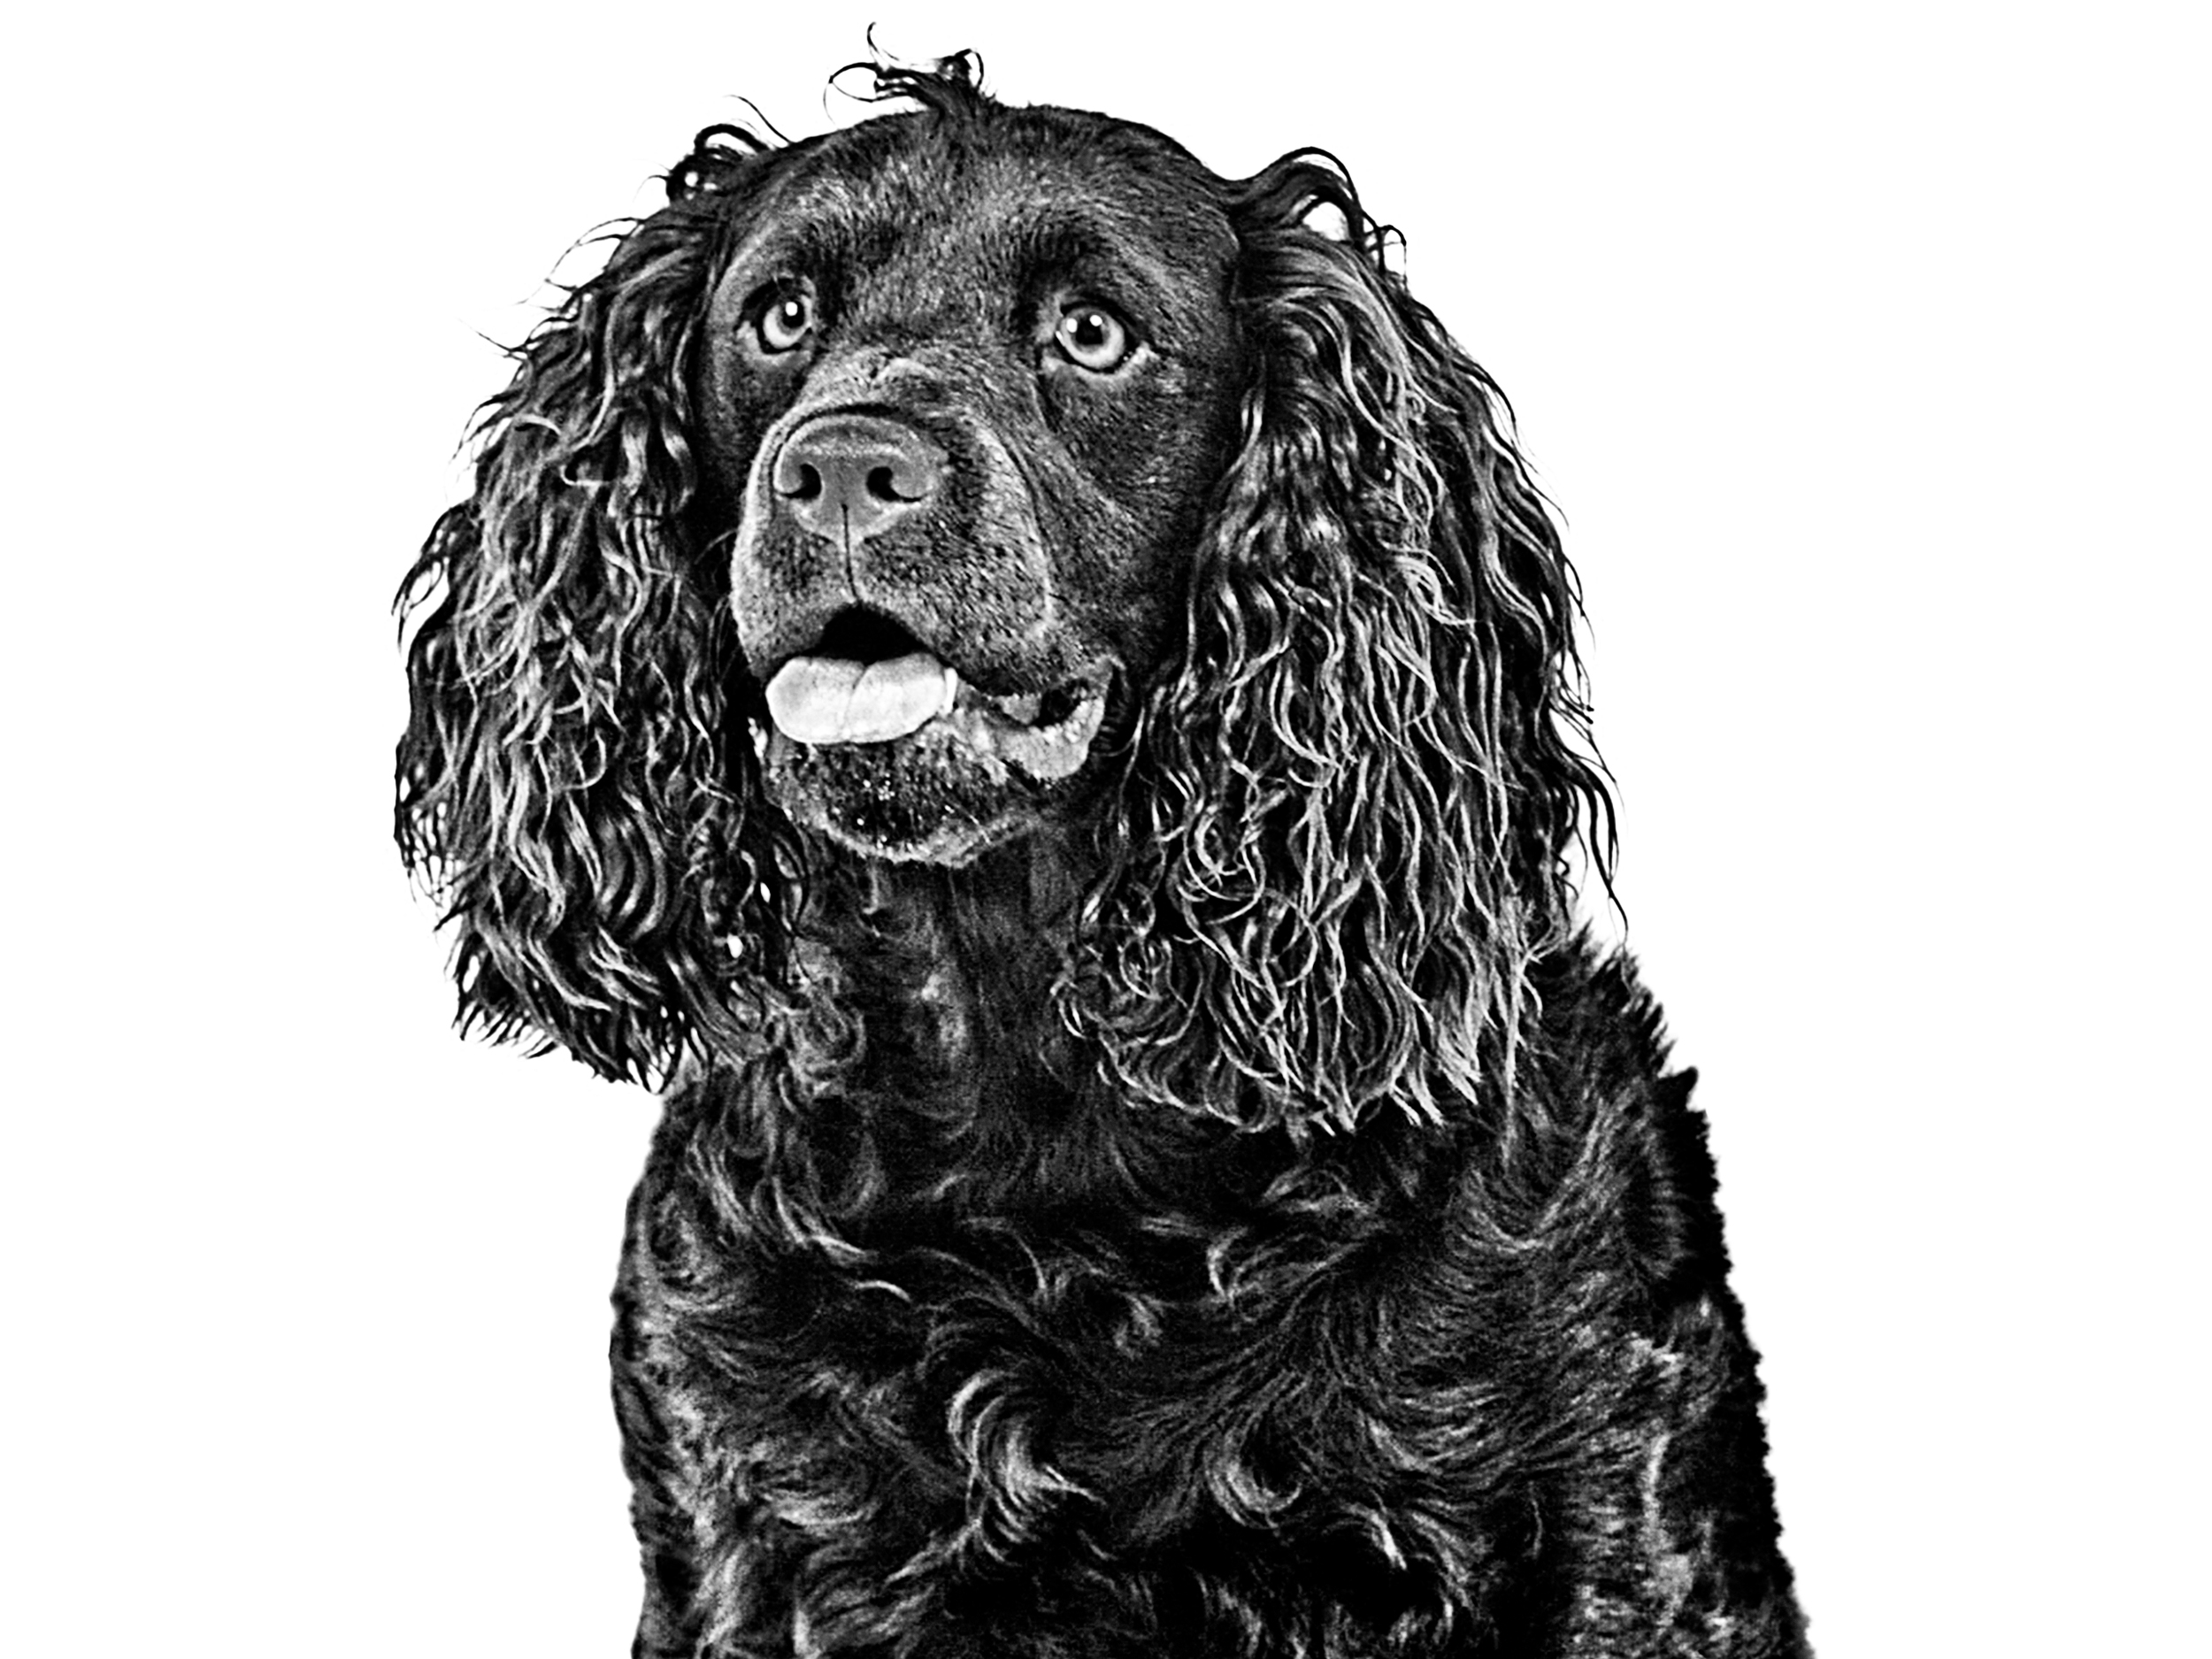 American Water Spaniel black and white